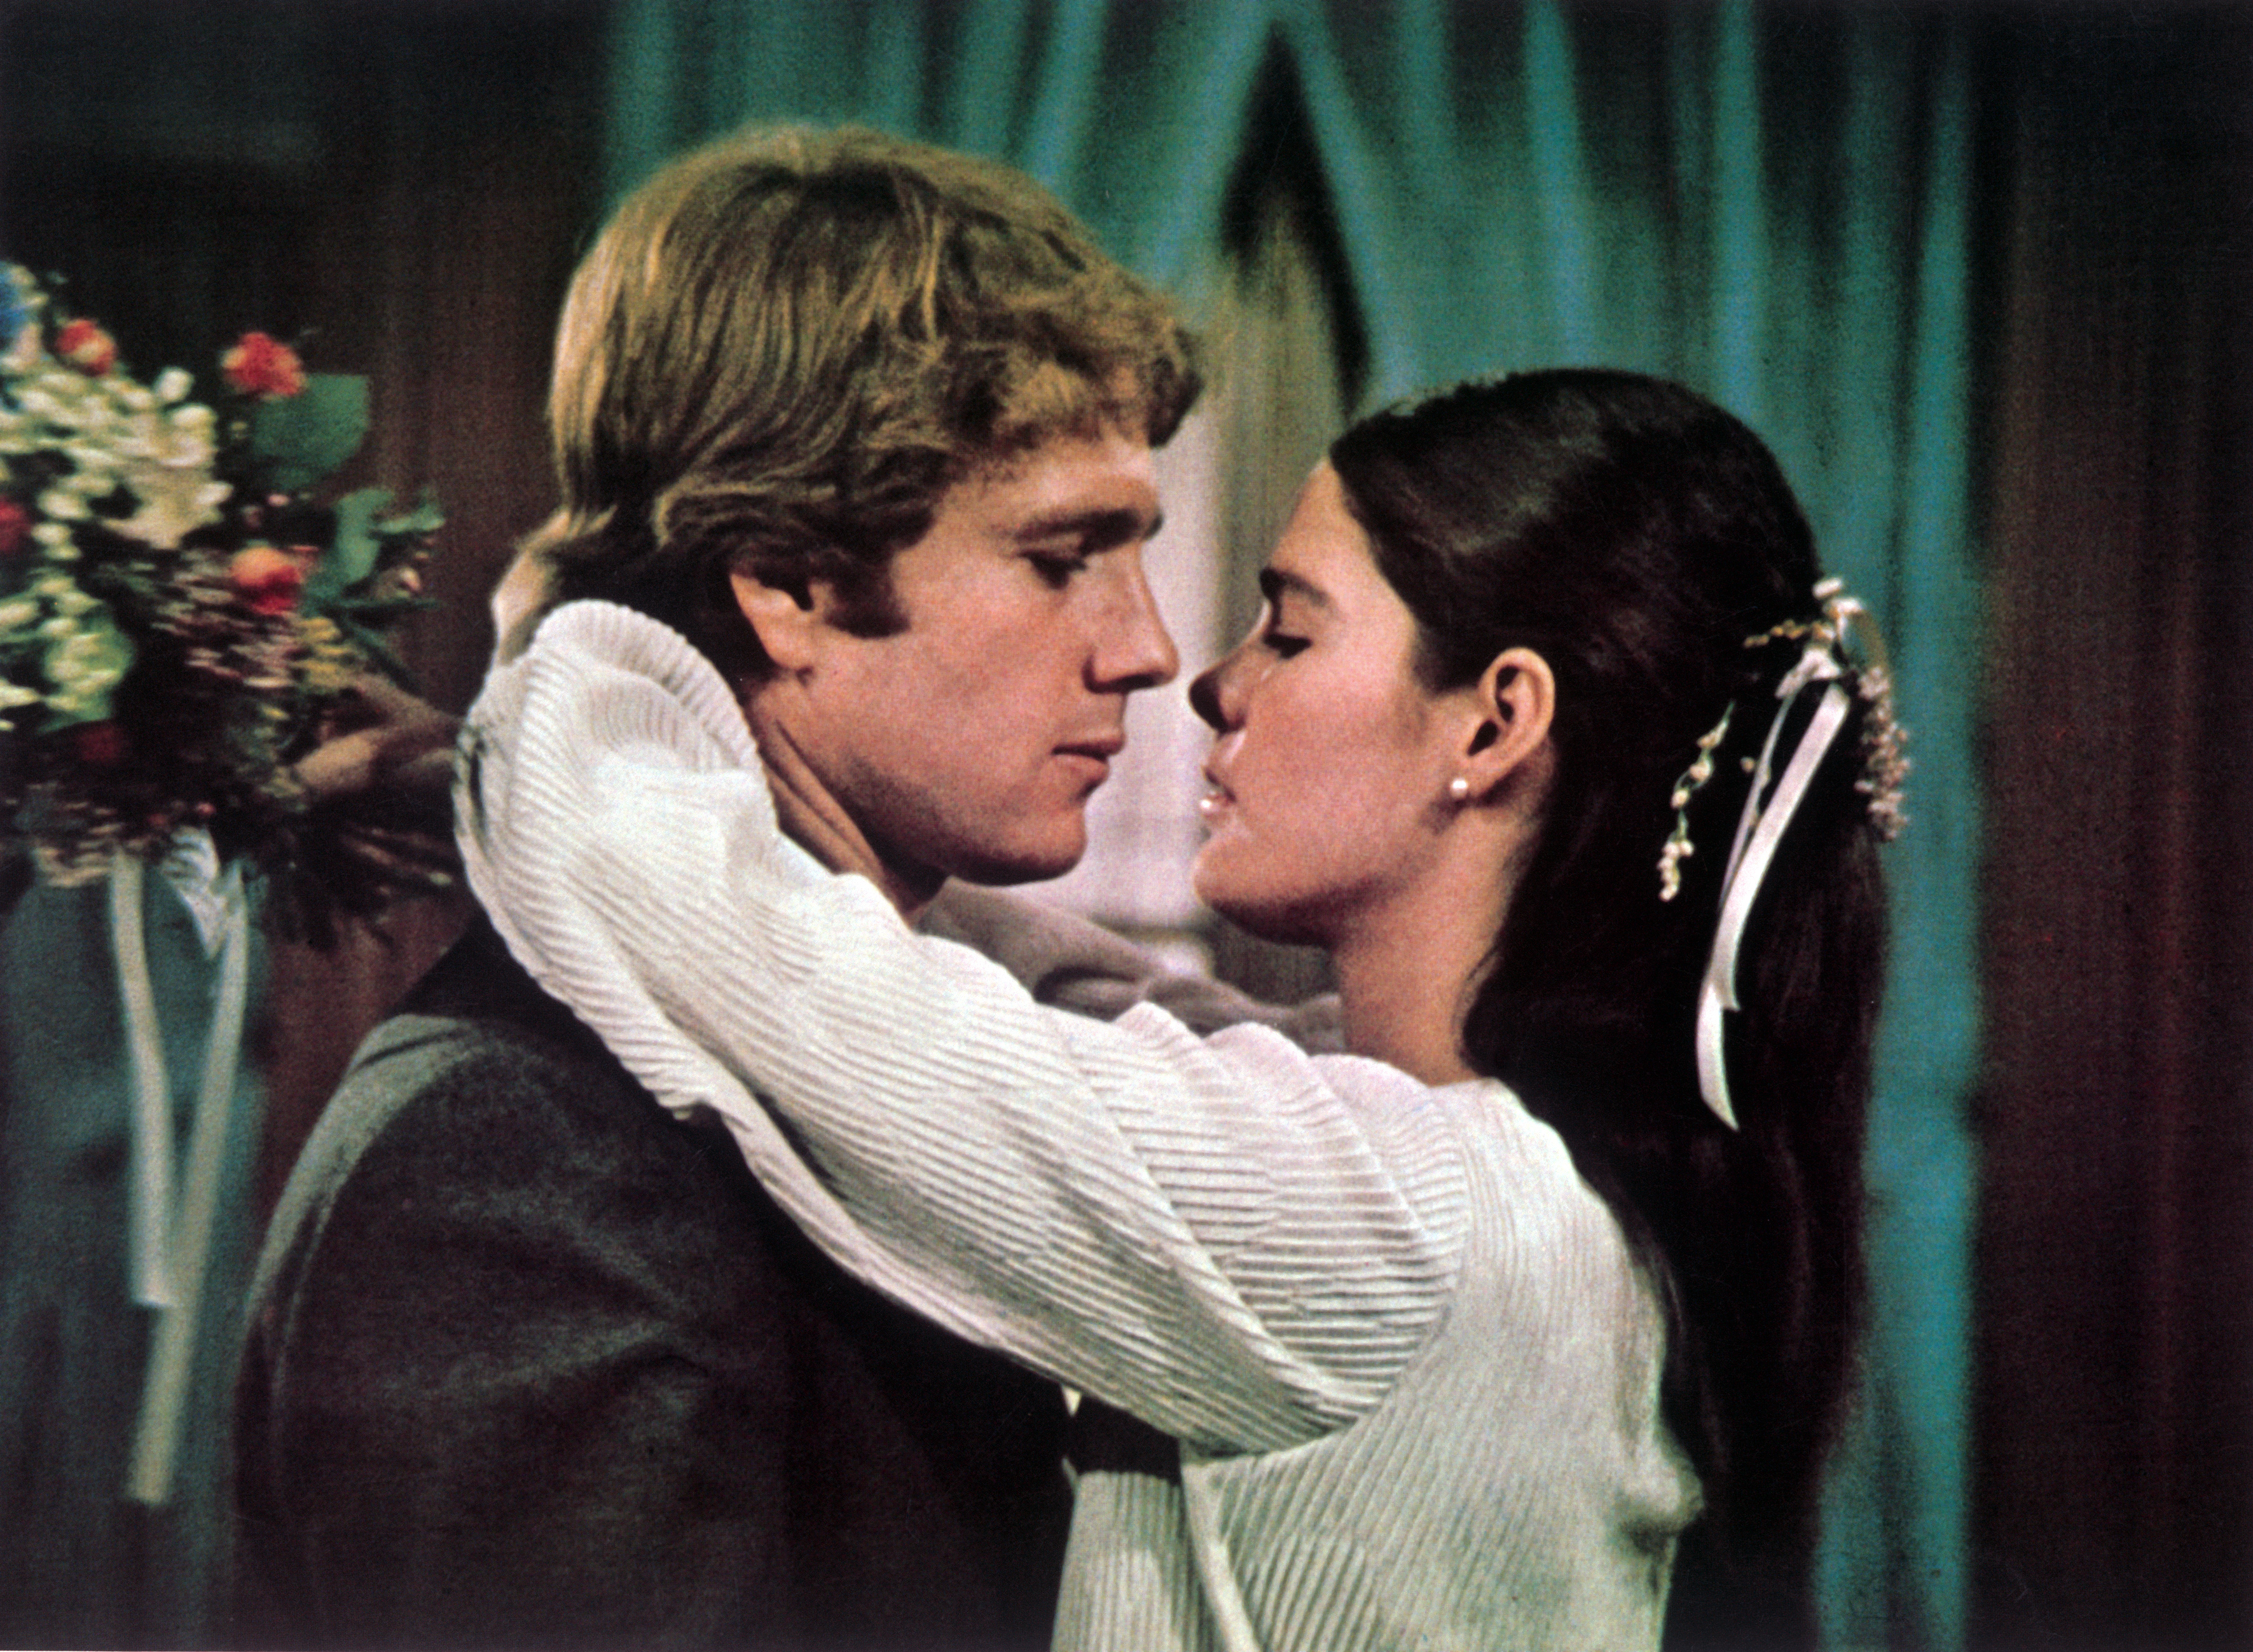 Ali MacGraw and Ryan O'Neal in "Love Story" in 1970 | Source: Getty Images